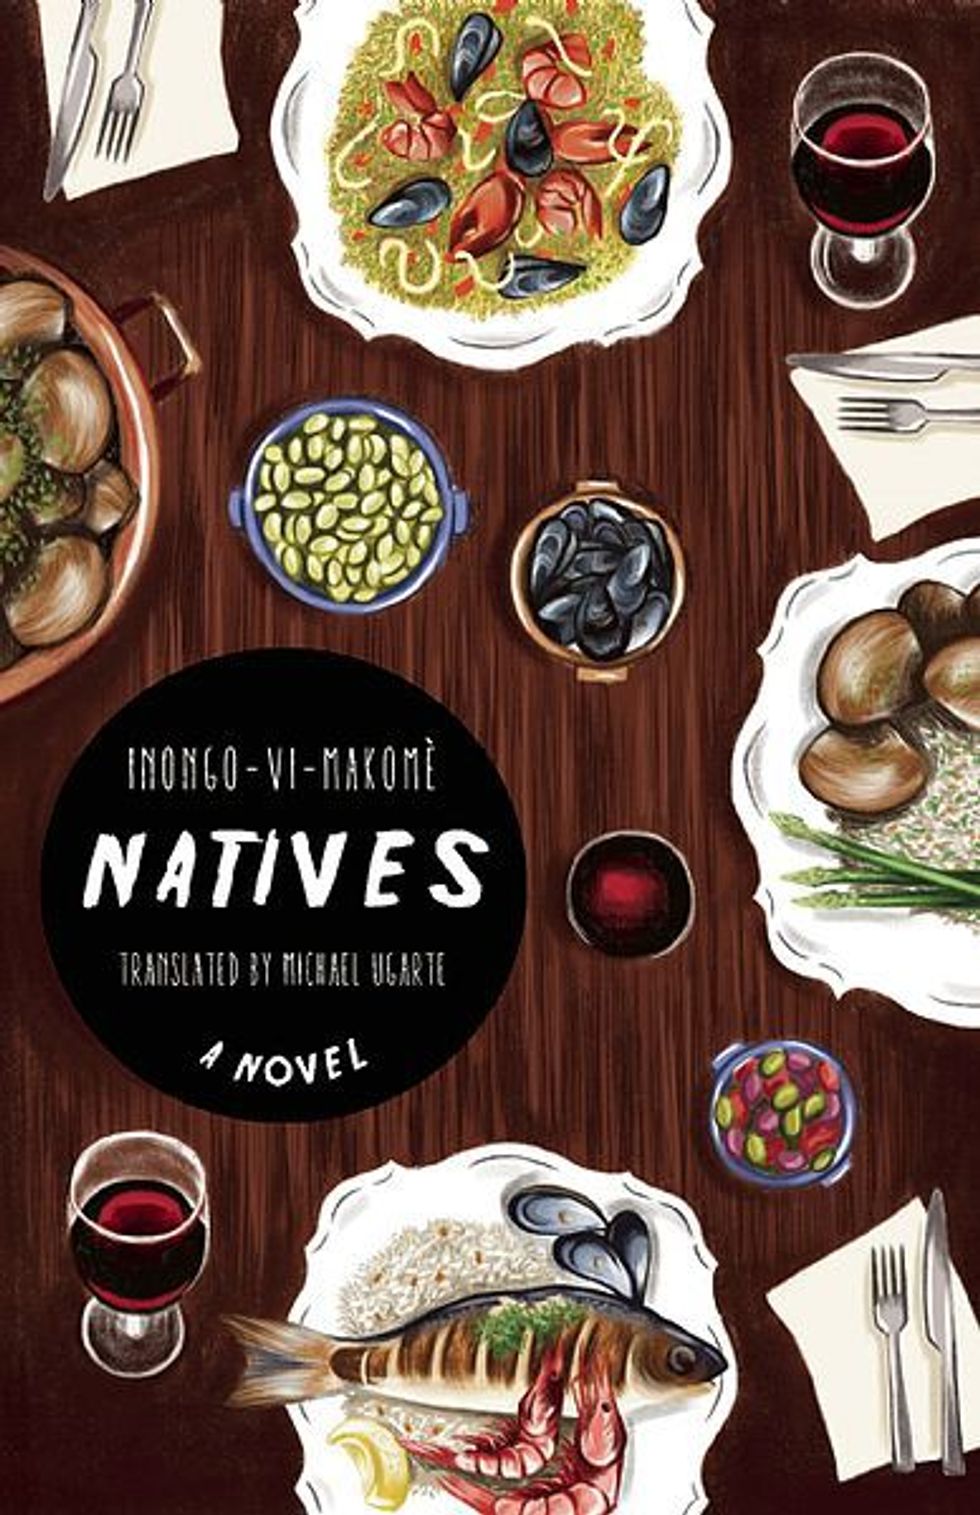 'Natives' Is A Startling Novel About Sex, Migration And Stereotypes Of African Virility